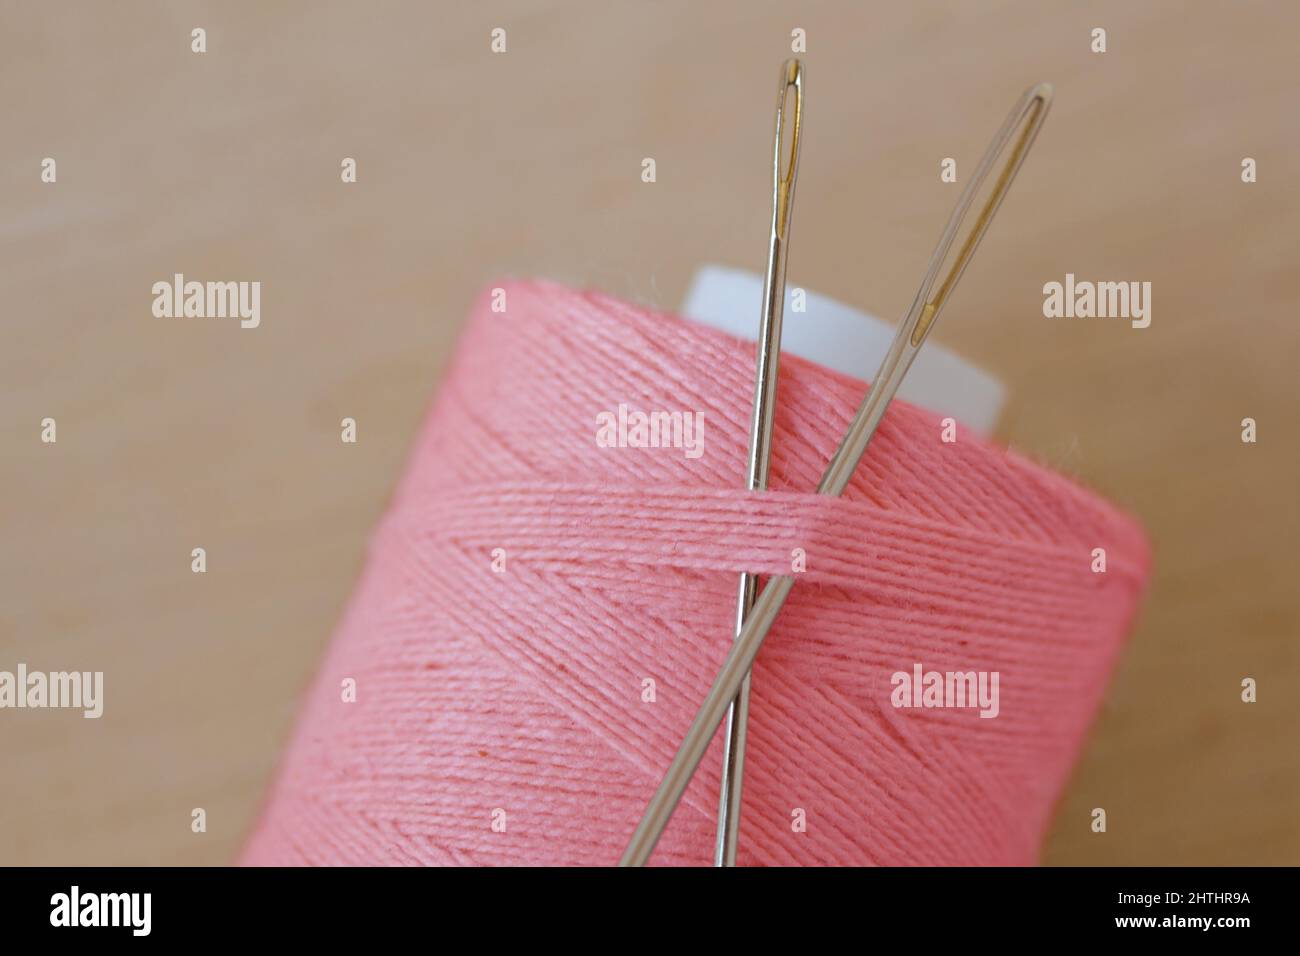 Close-up of sewing needles with pink spool of thread - Concept of teamwork and gender issues Stock Photo